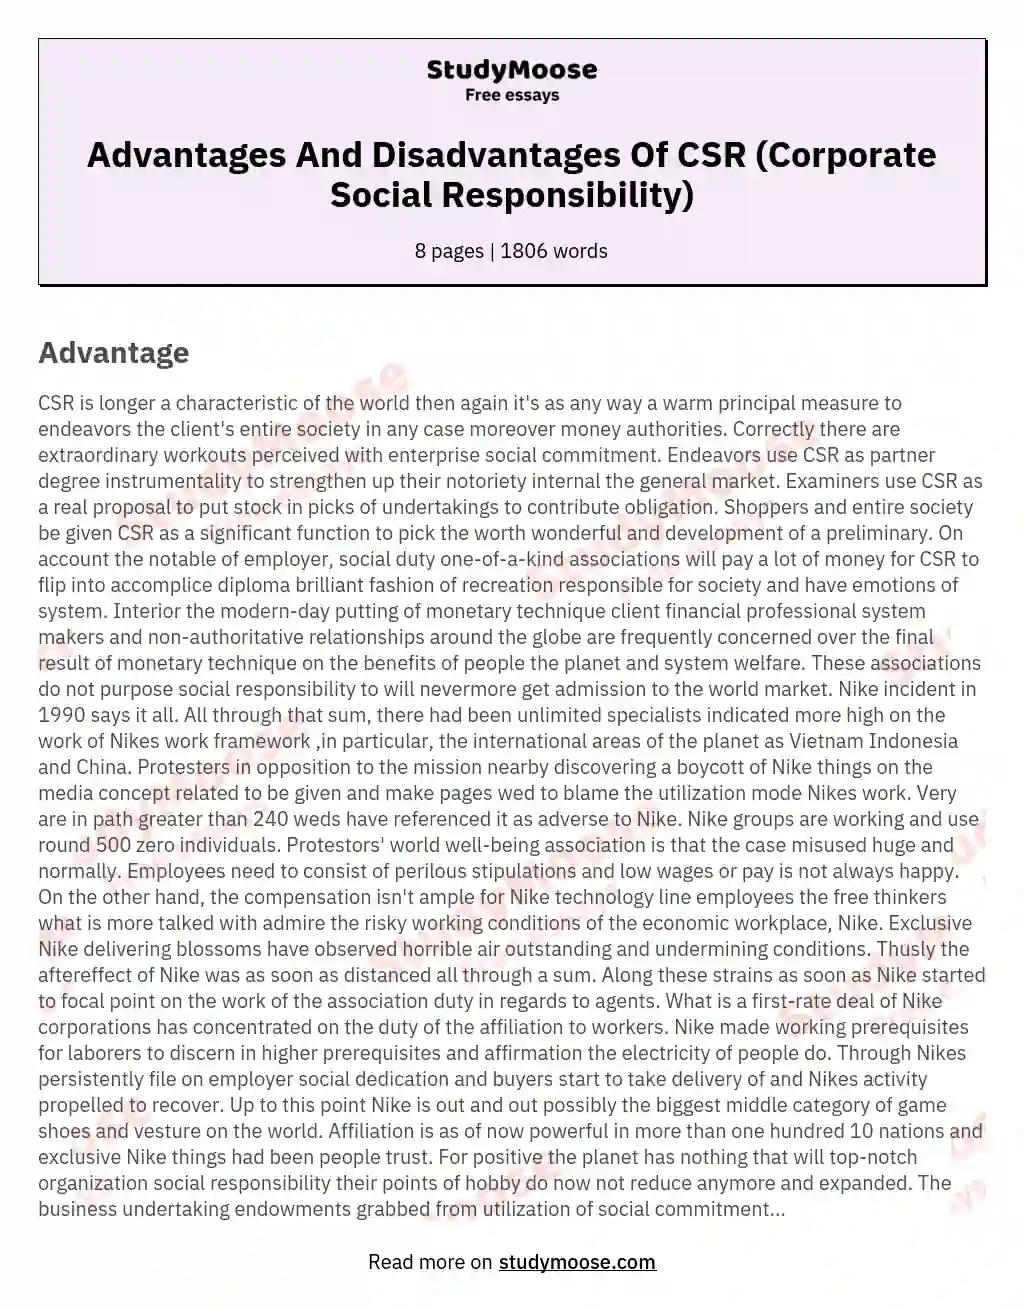 Advantages And Disadvantages Of CSR (Corporate Social Responsibility)